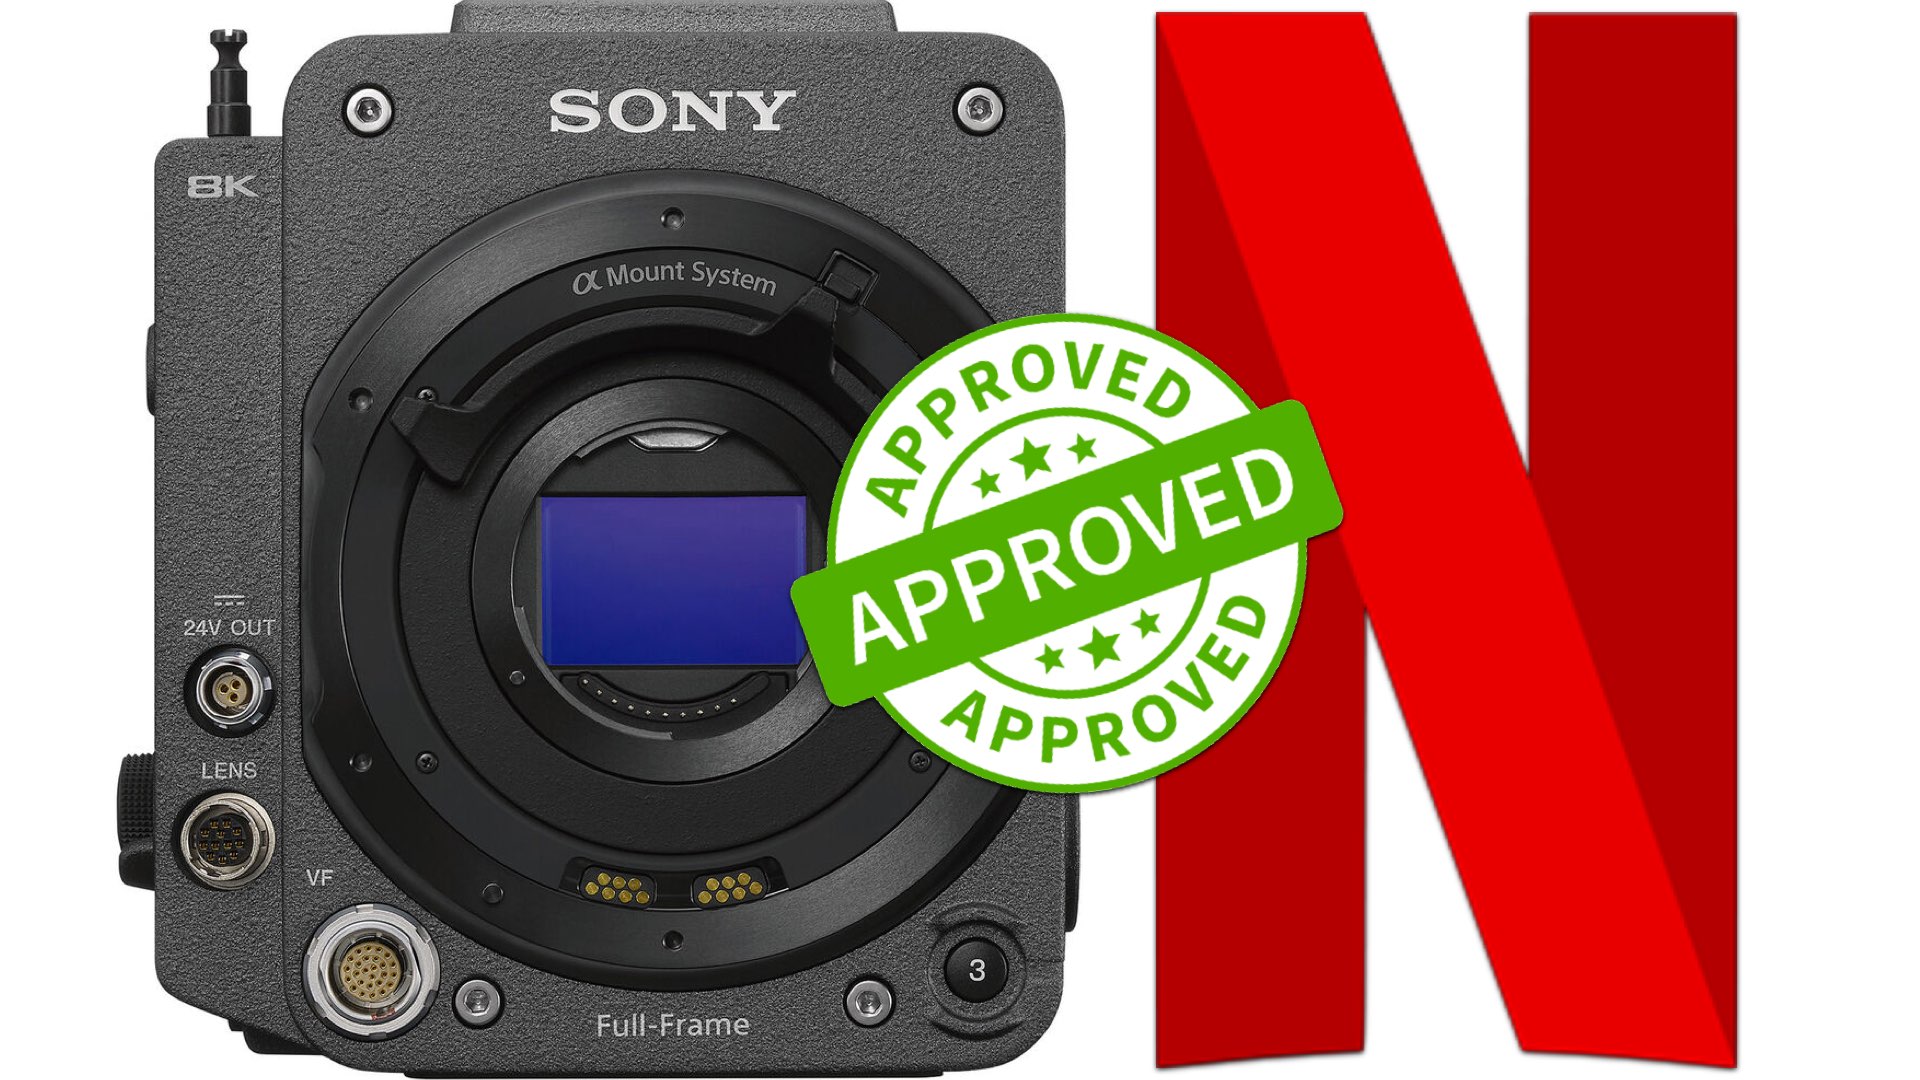 Sony VENICE 2 is Netflix Approved